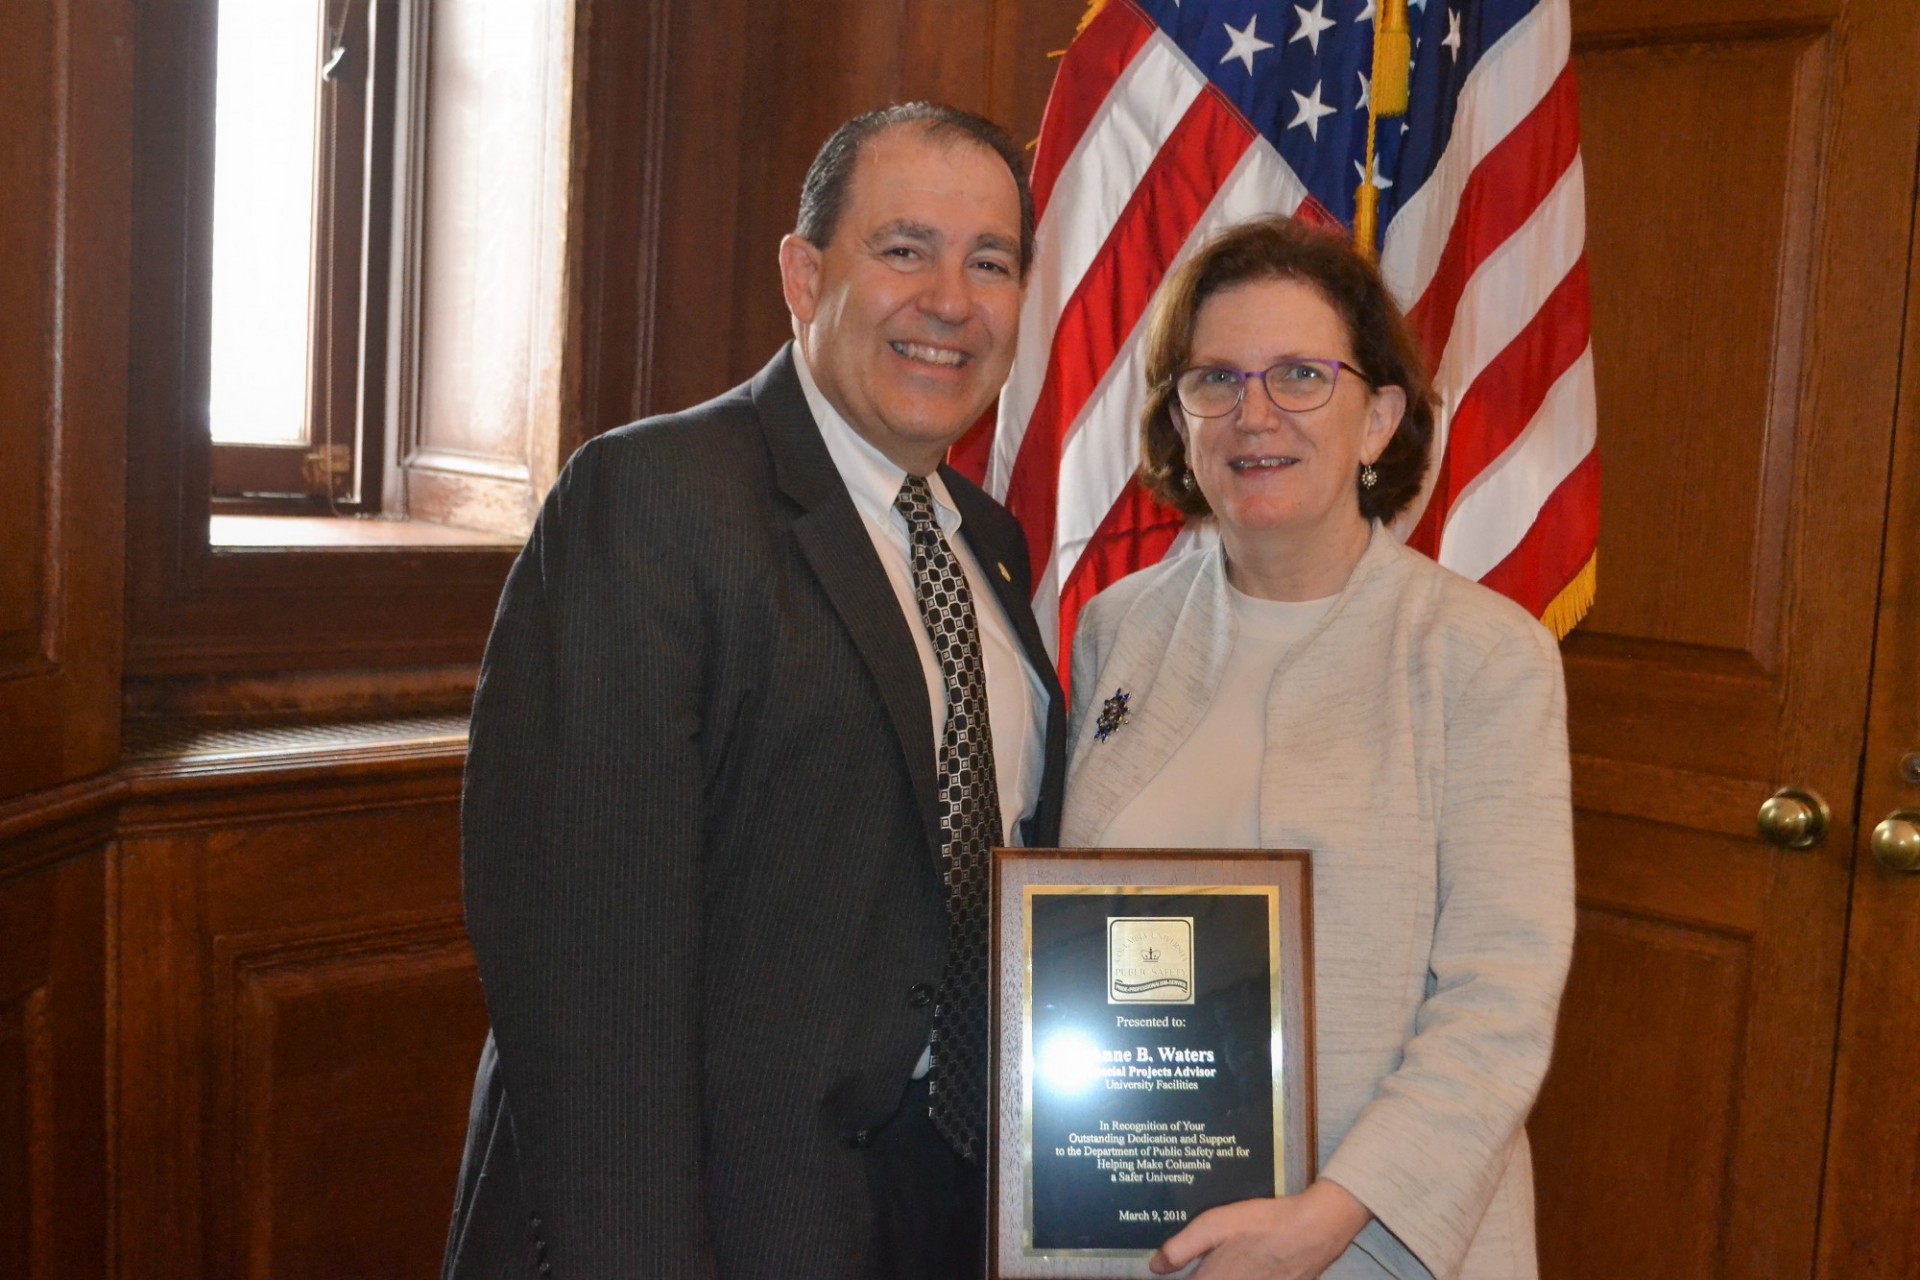 Anne Waters, special projects advisor for Facilities and Operations, was recognized for exceptional service.